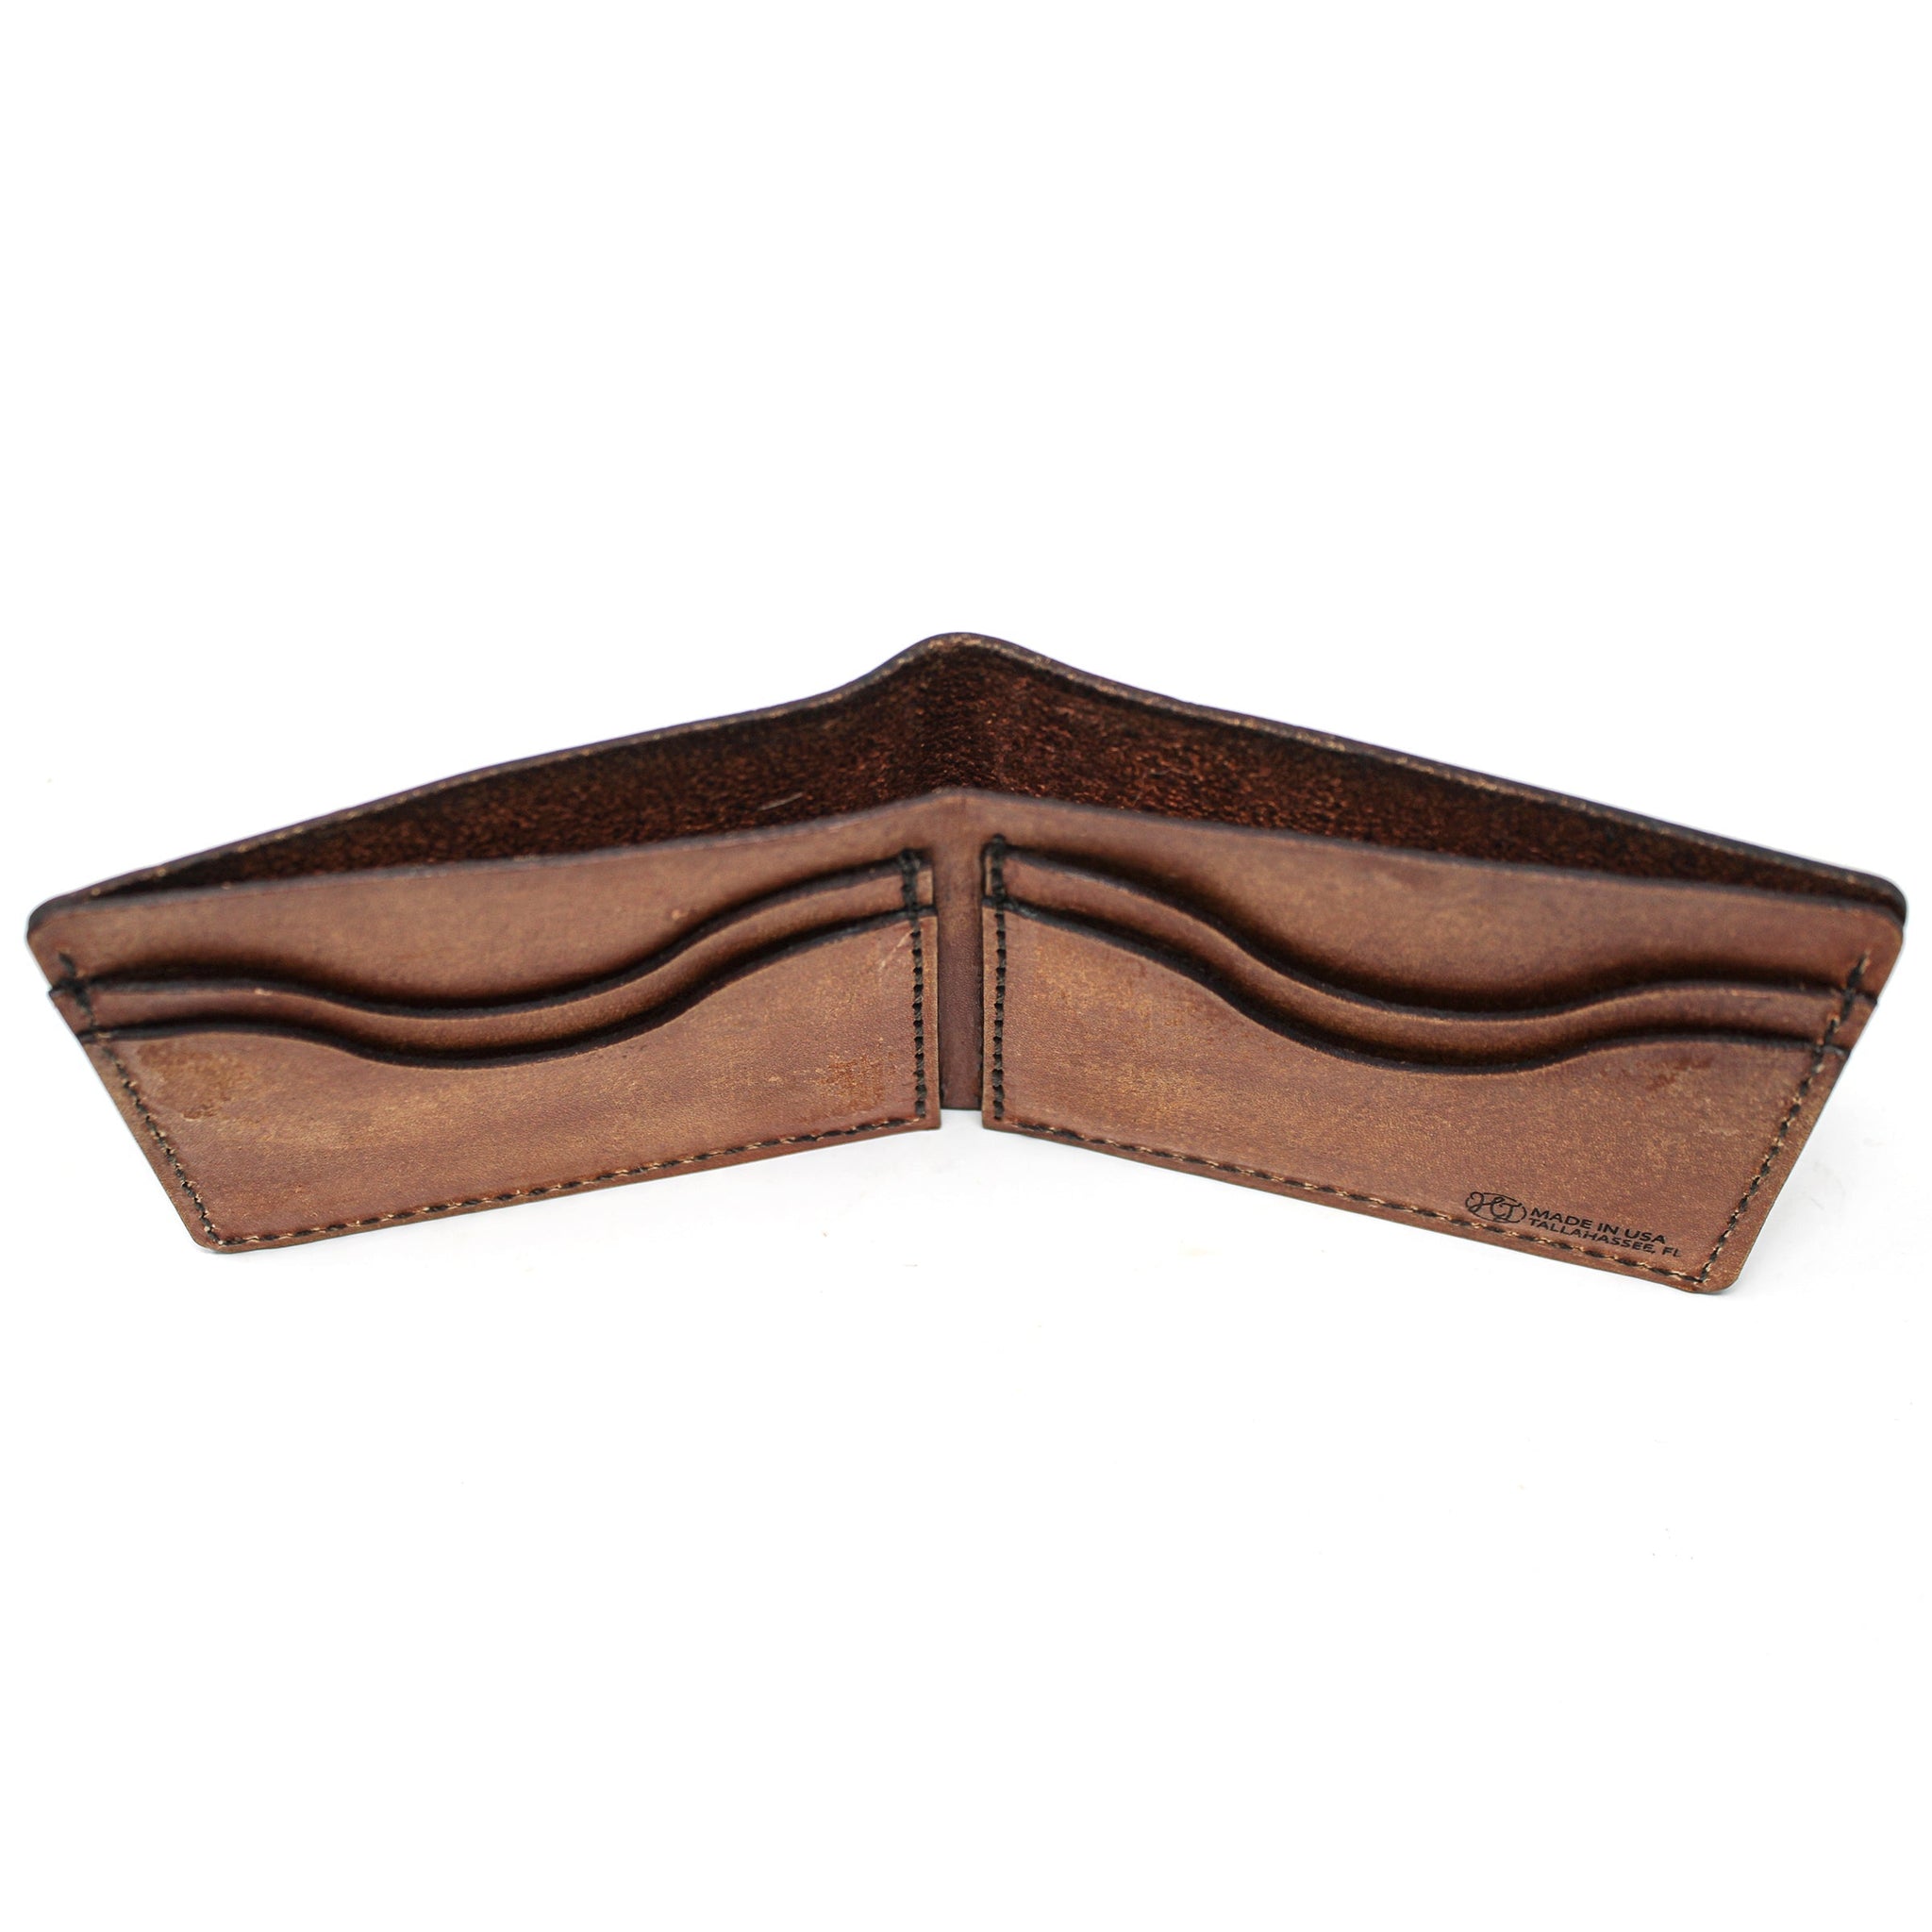 Leather Bill Fold Wallet -  Whitetail Glance